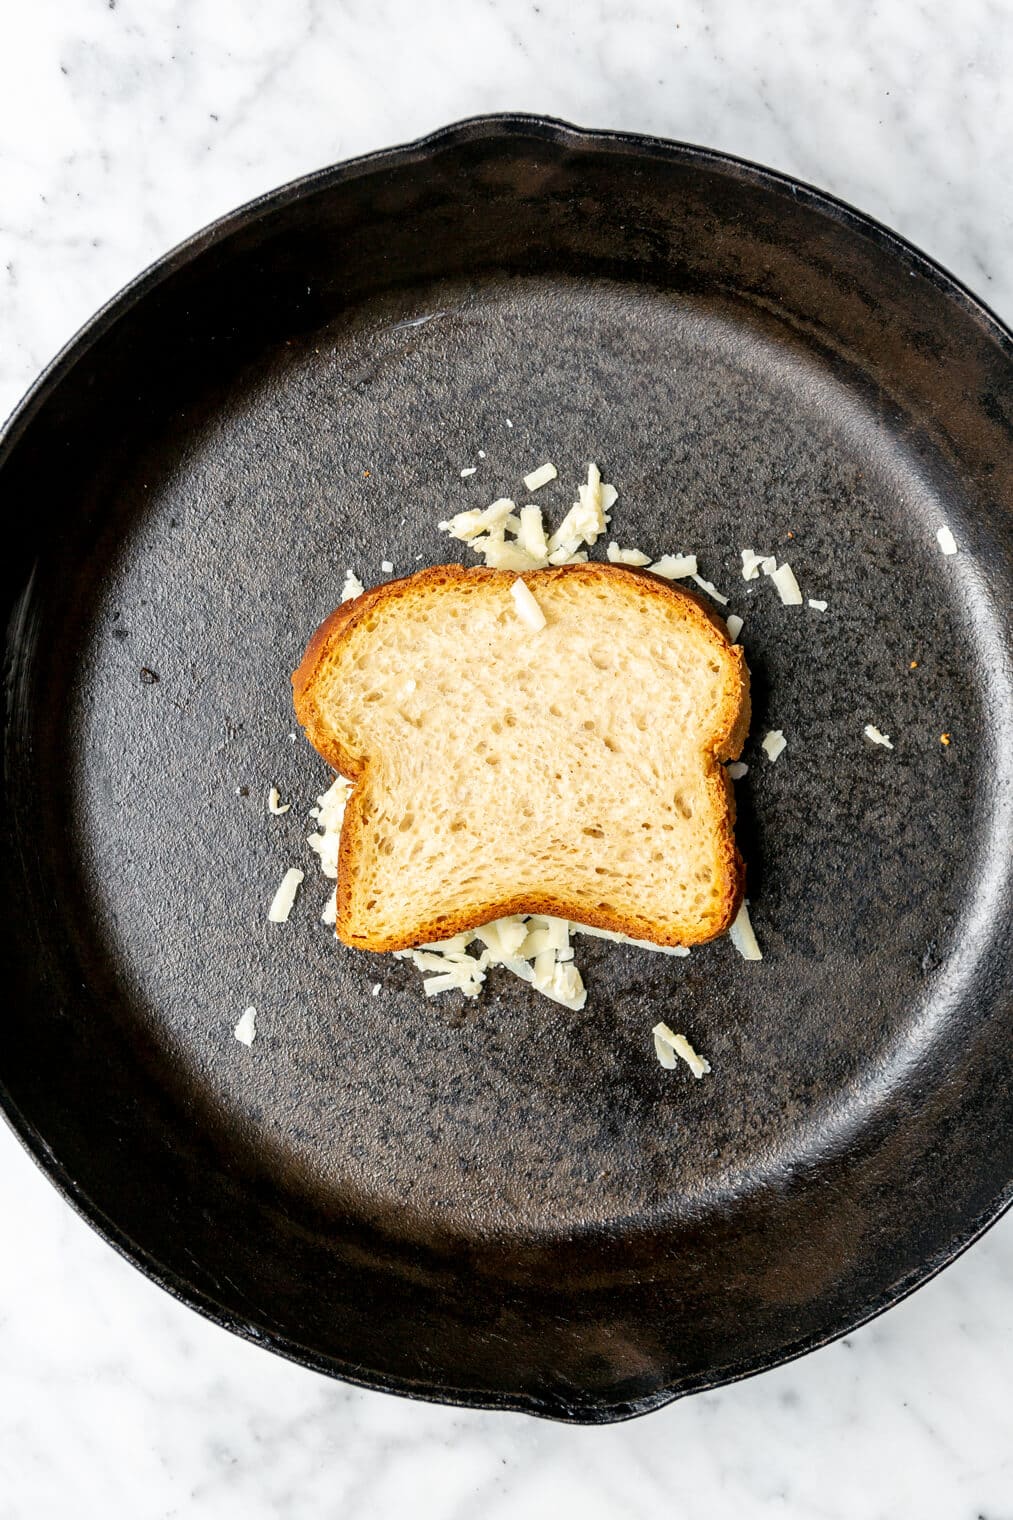 Slice of bread on top of shredded cheese in a cast iron pan.